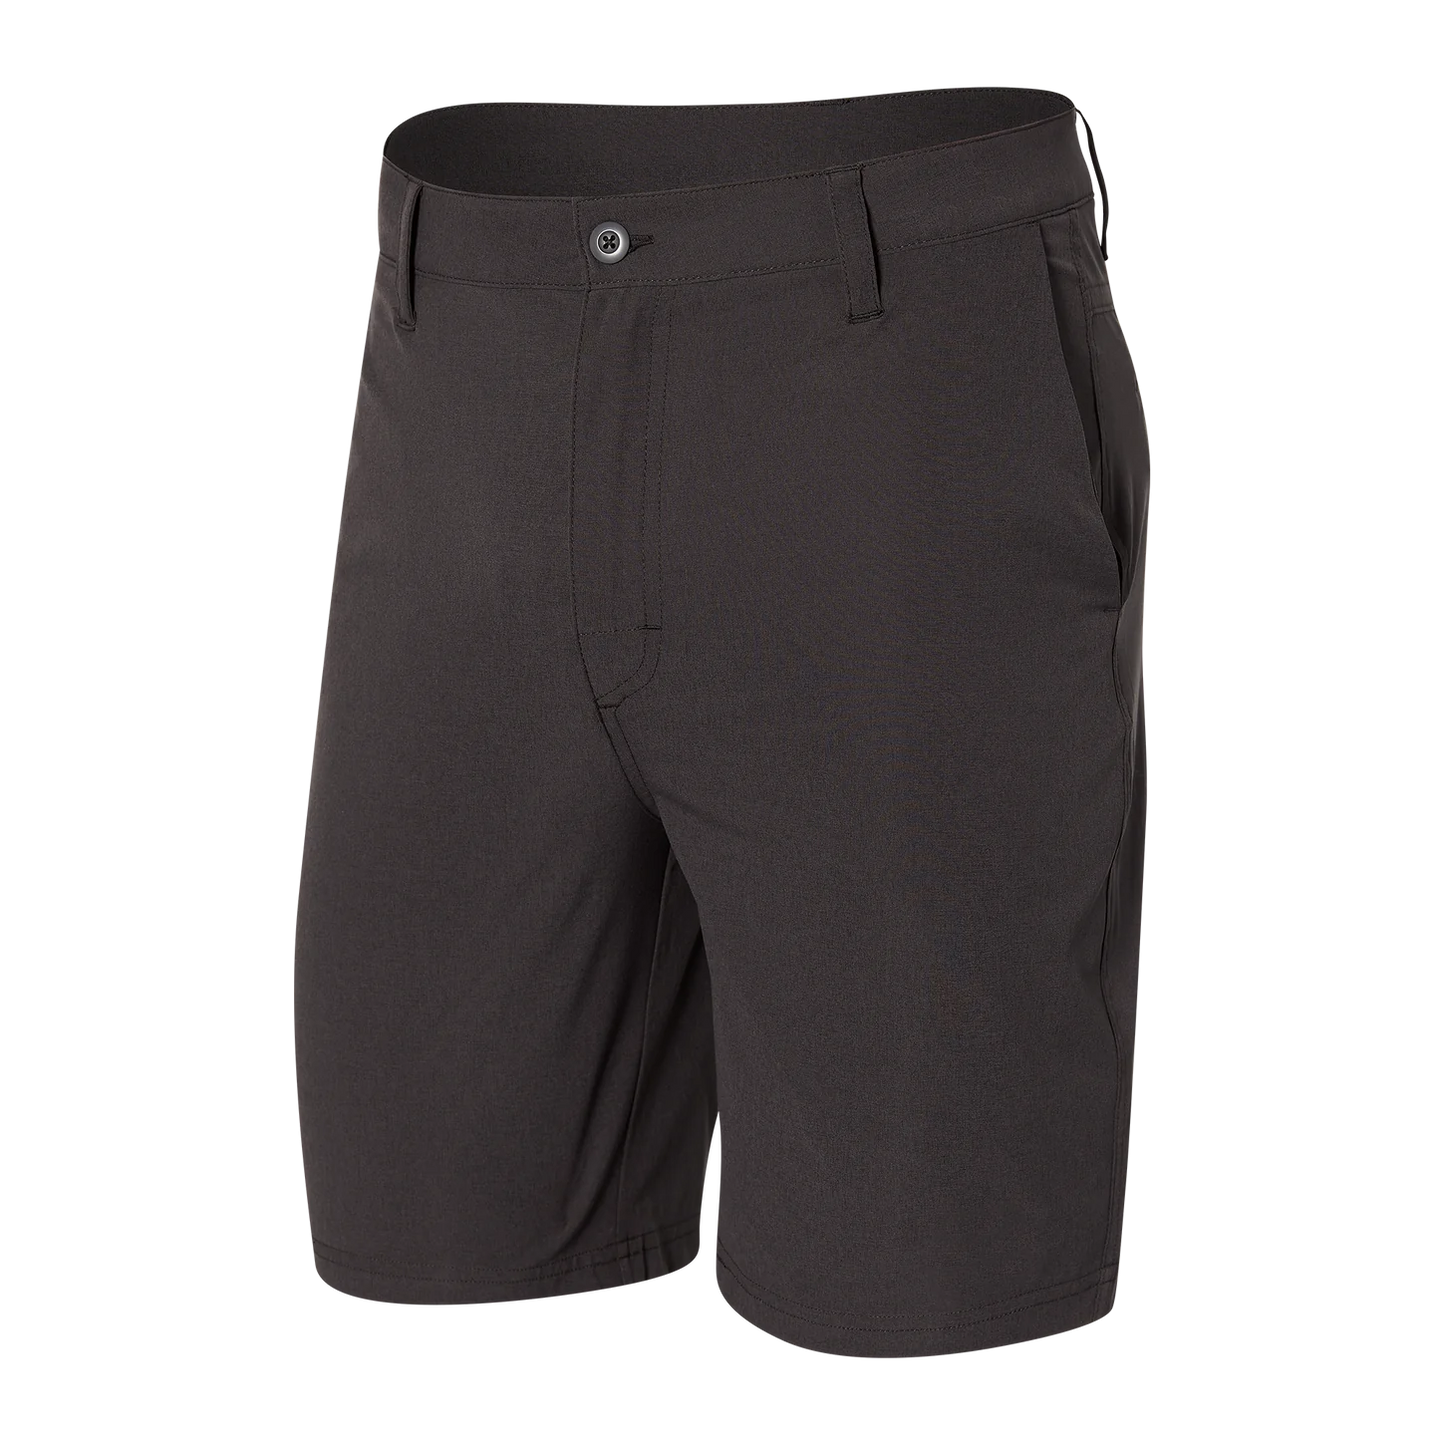 SAXX GO TO TOWN CASUAL SPORT 2N1 Shorts 8" / Faded Black